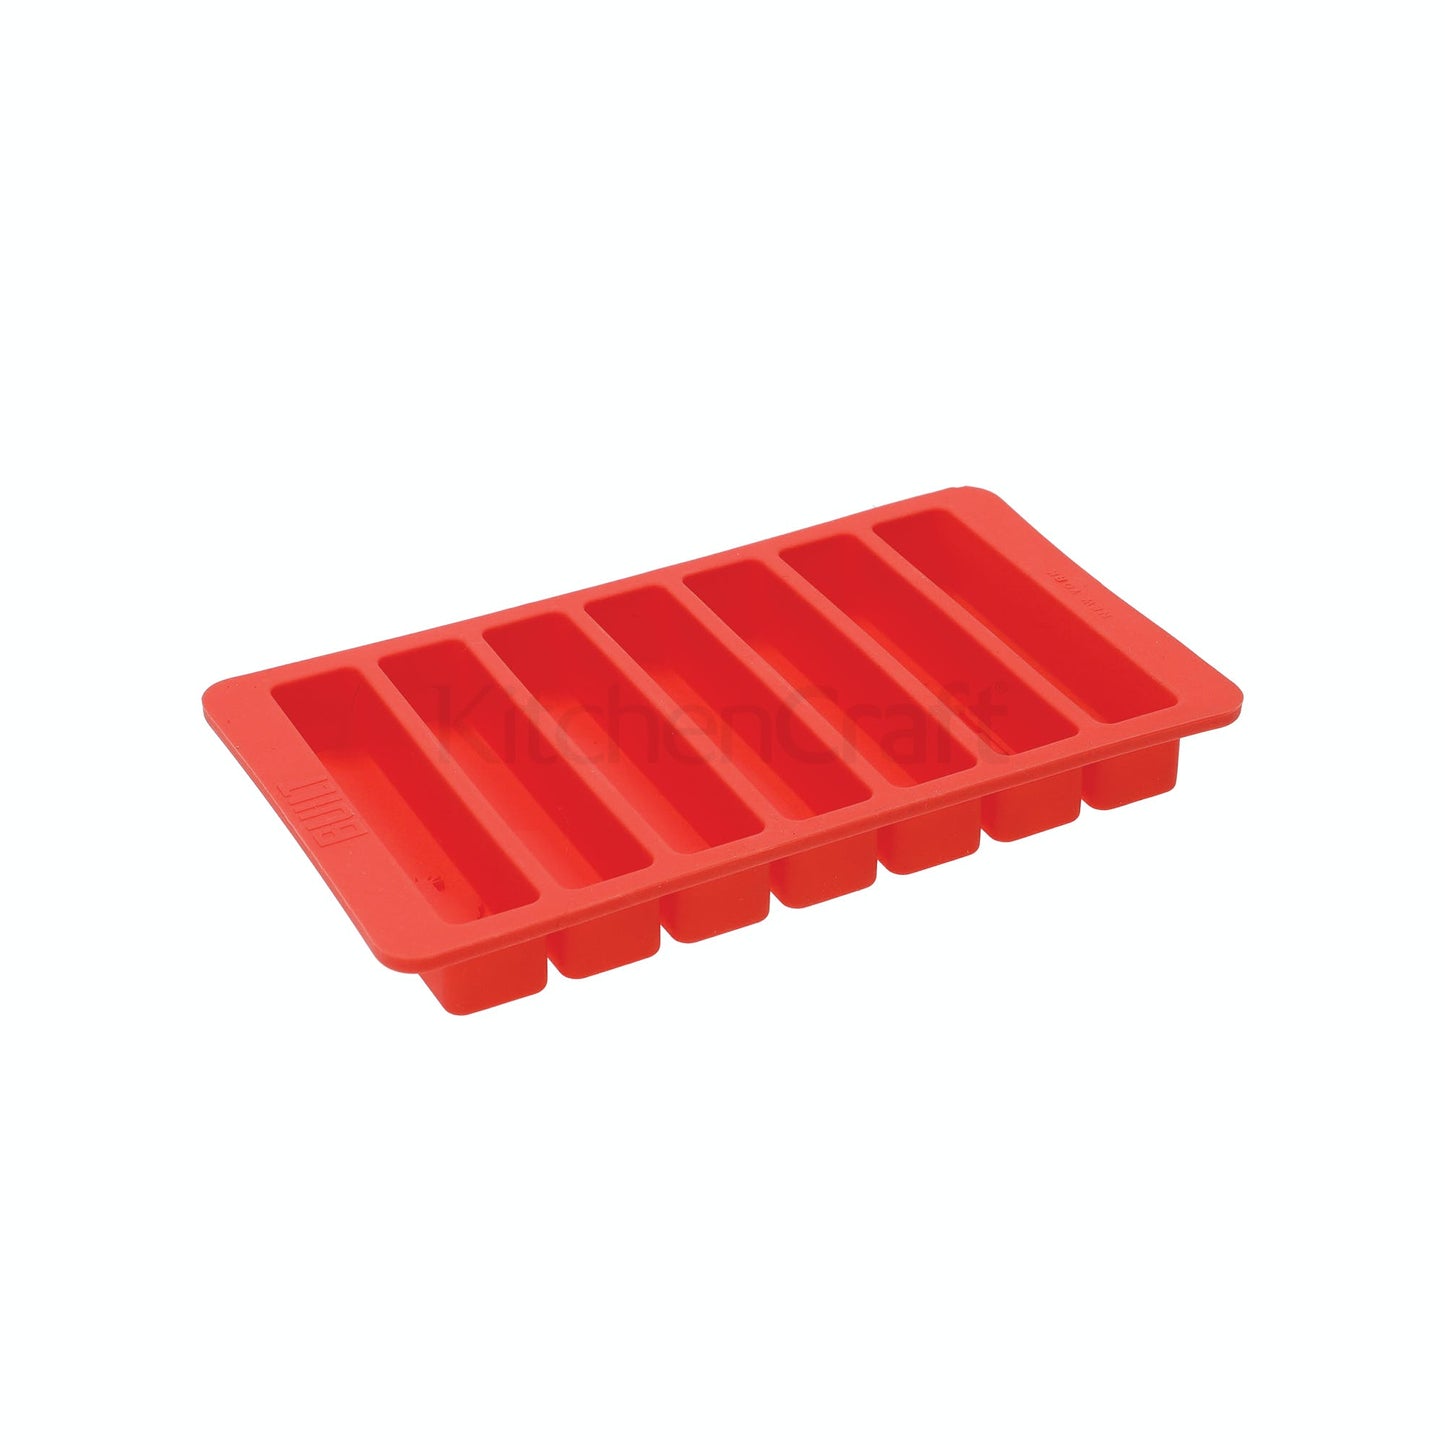 BUILT Water Bottle Ice Cube Tray Red 19.5 x 11.5cm